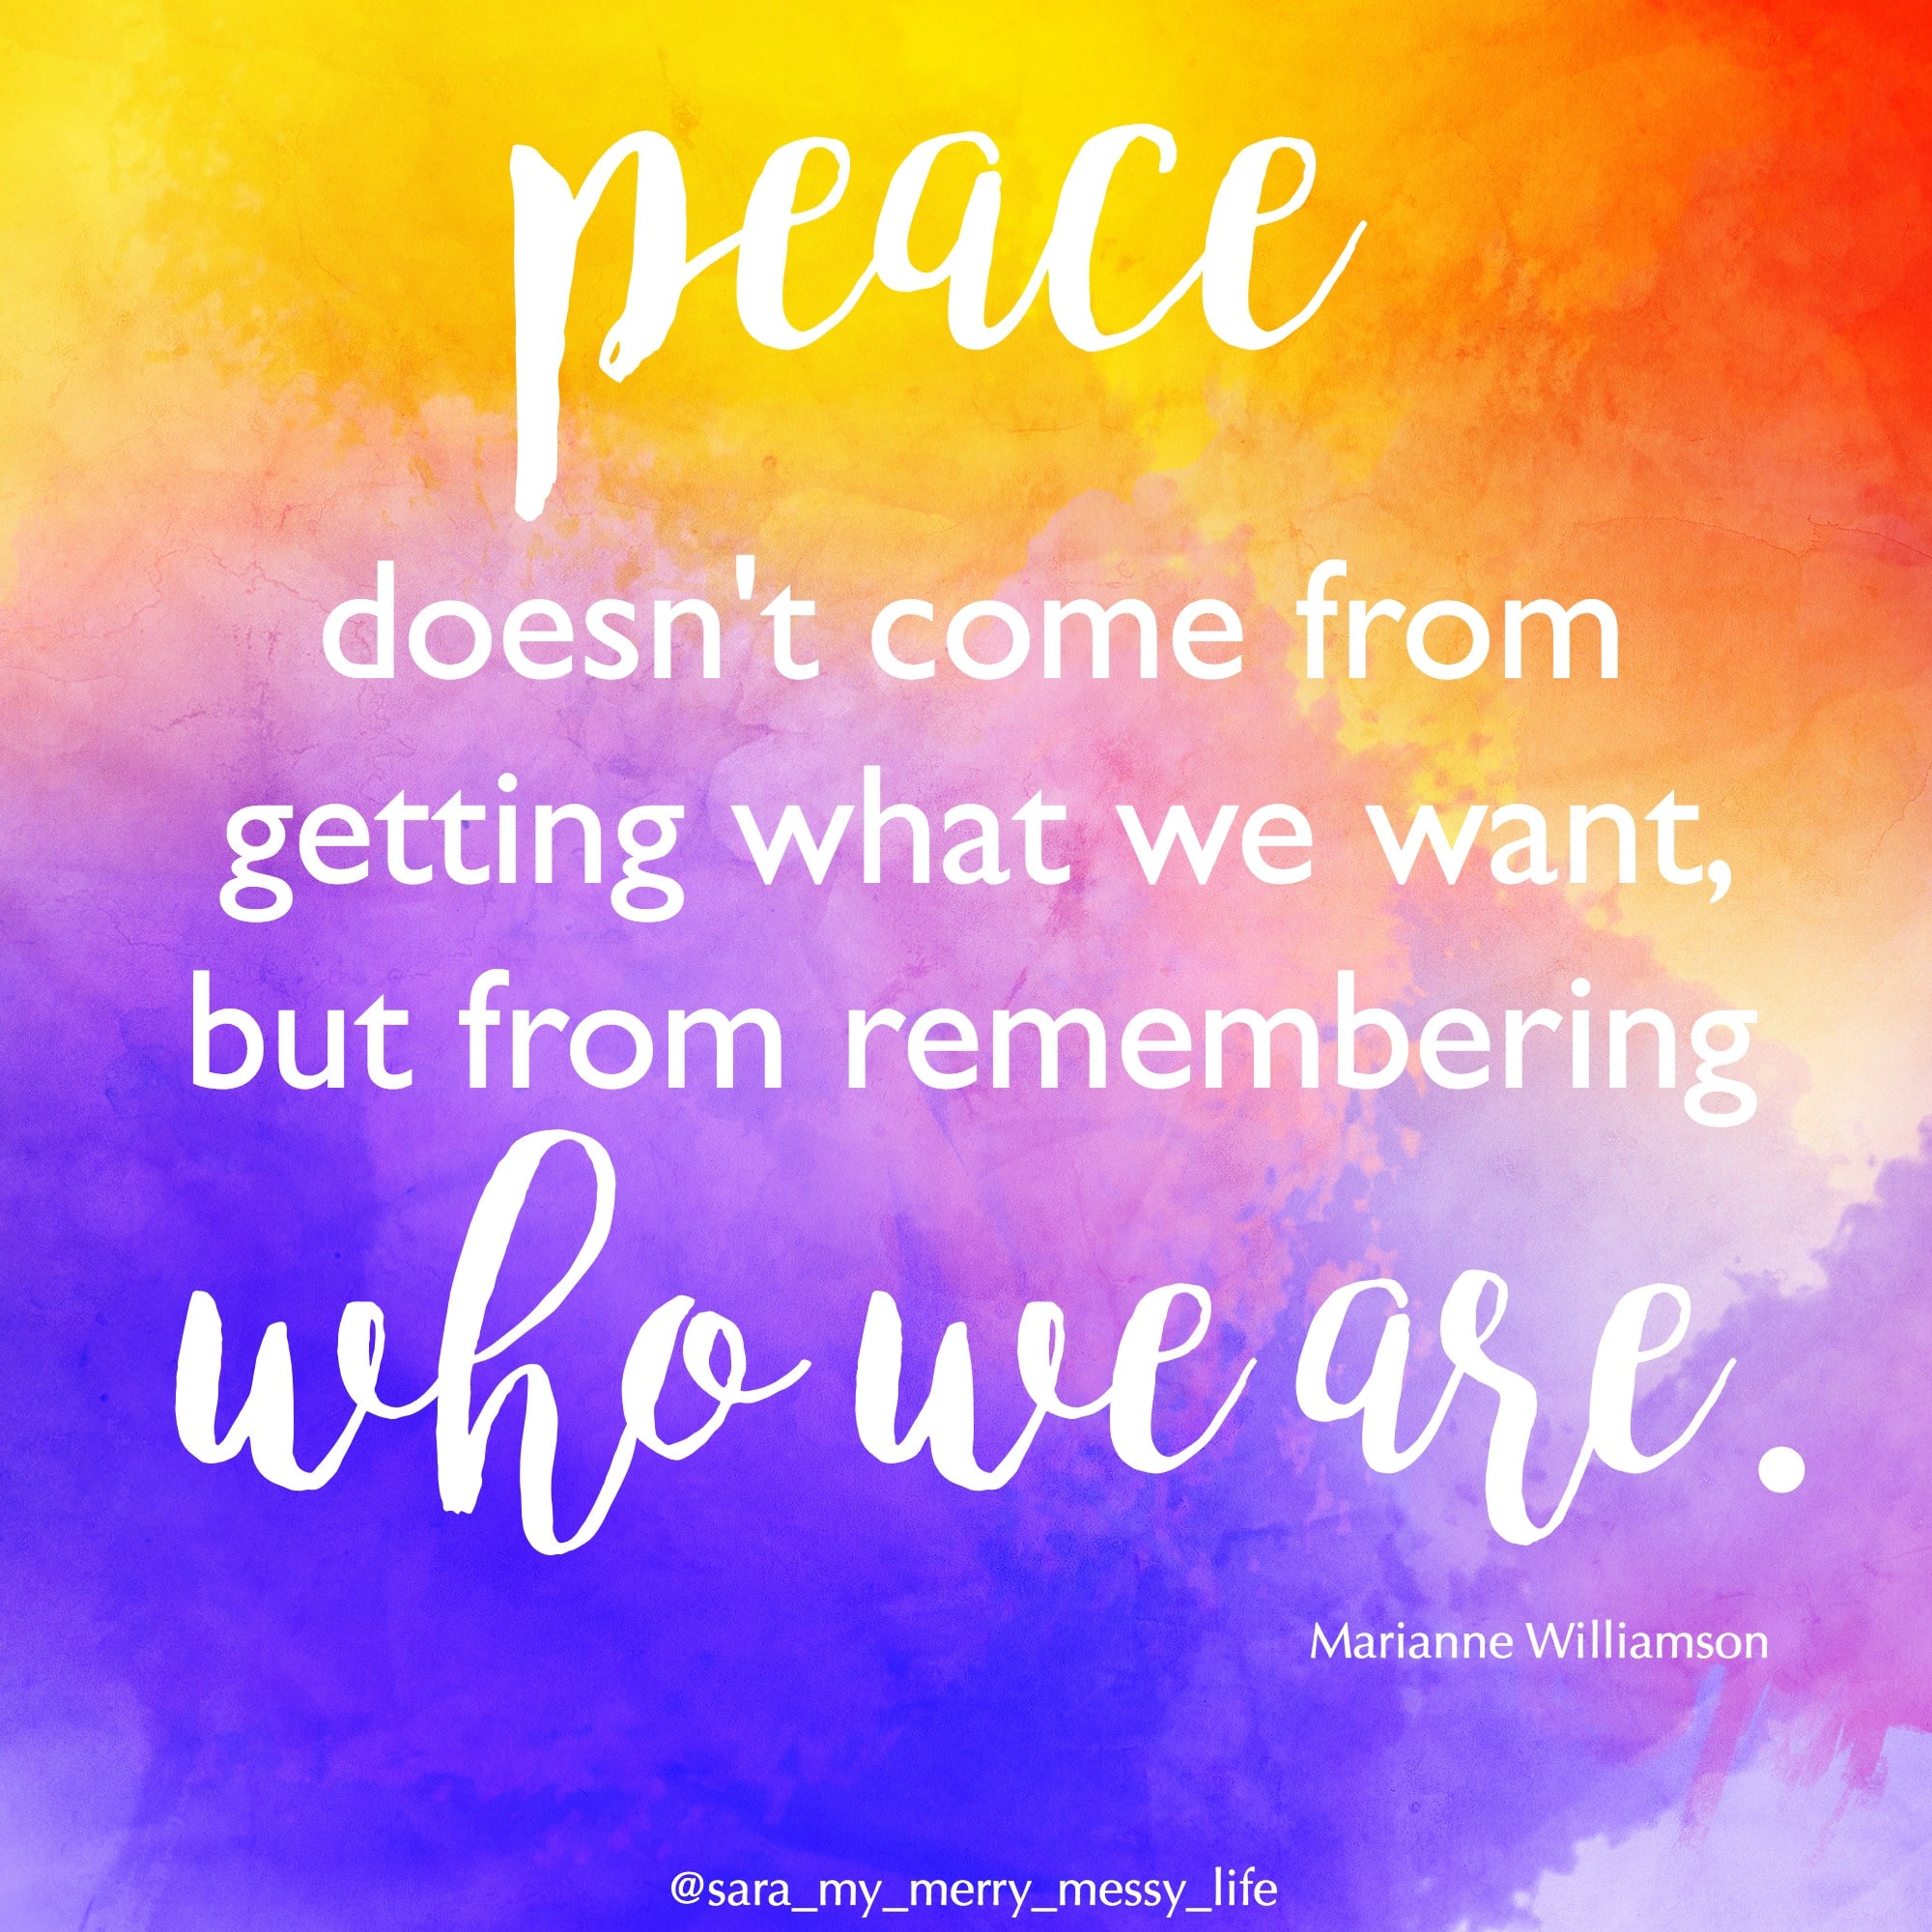 Peace doesn't come from getting what we want, but from remembering who we are. - Marianne Williamson